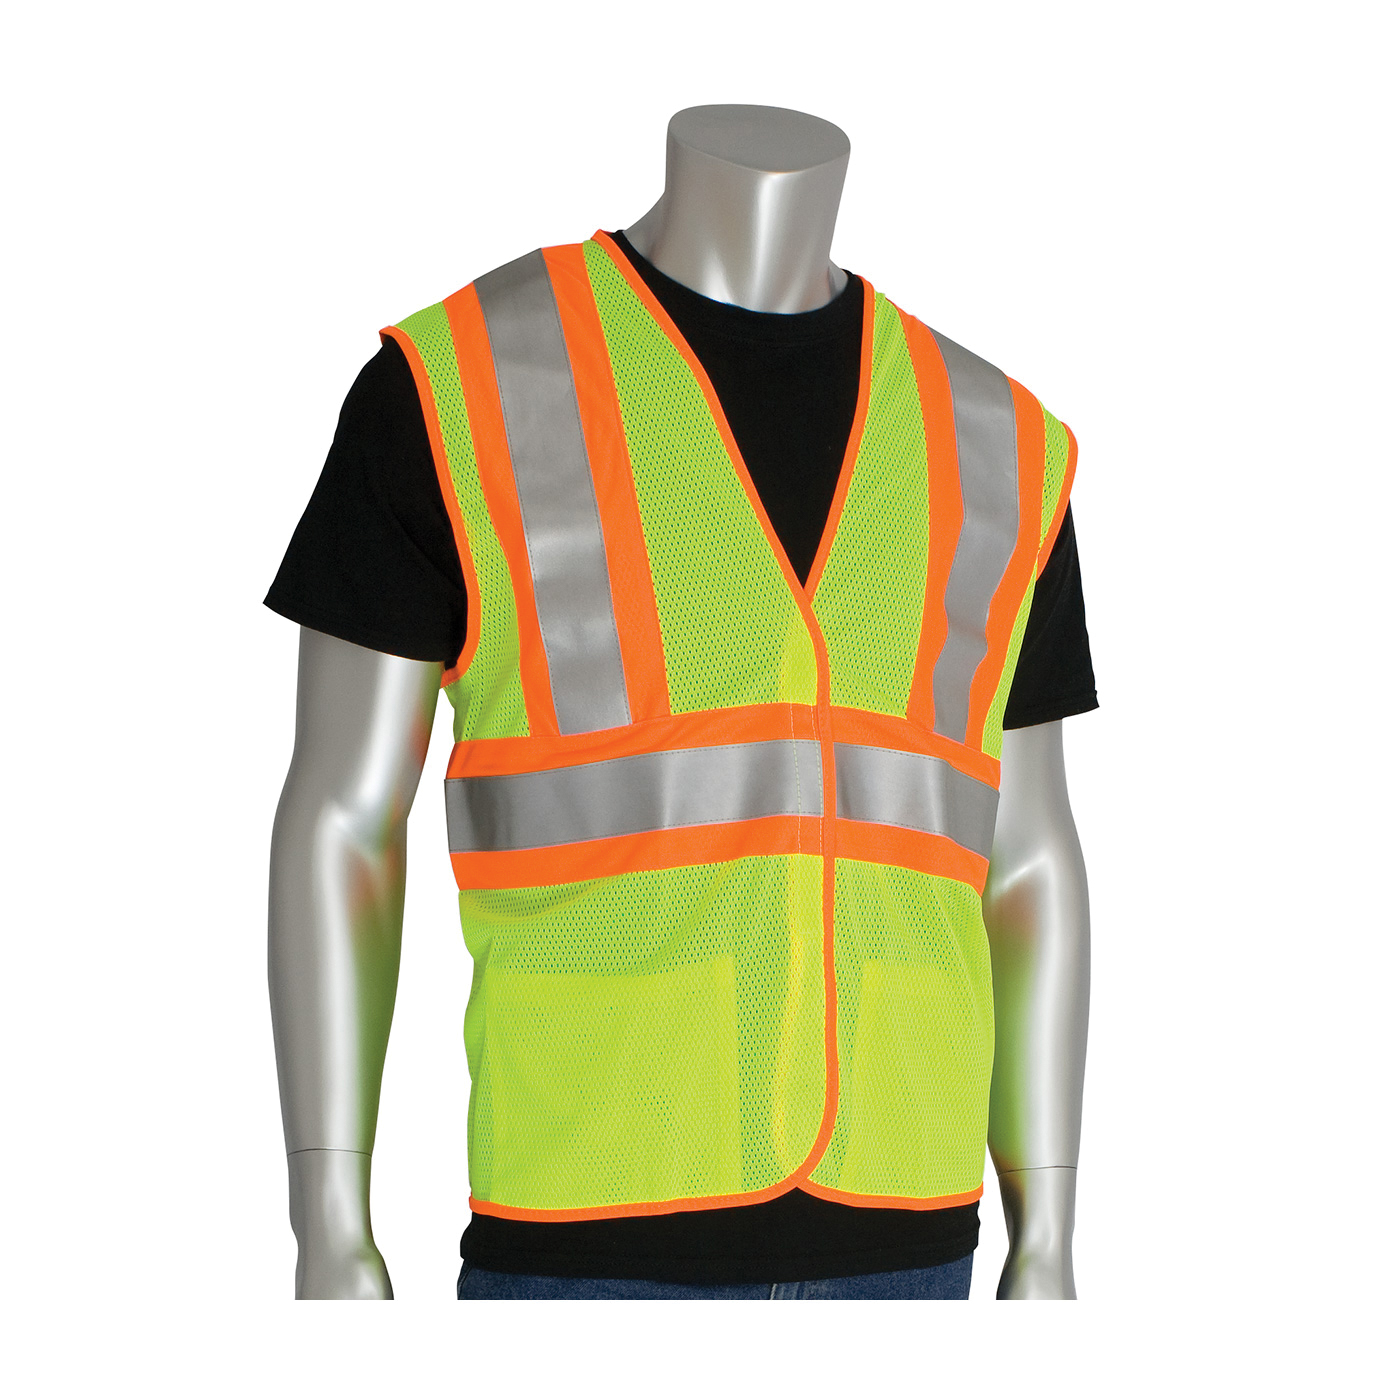 PIP® 305-MVFRLY-L/XL 2-Tone FR Treated Safety Vest, L to XL, Hi-Viz Lime Yellow, Polyester, Hook and Loop Closure, 2 Pockets, ANSI Class: Class 2, ANSI Specified